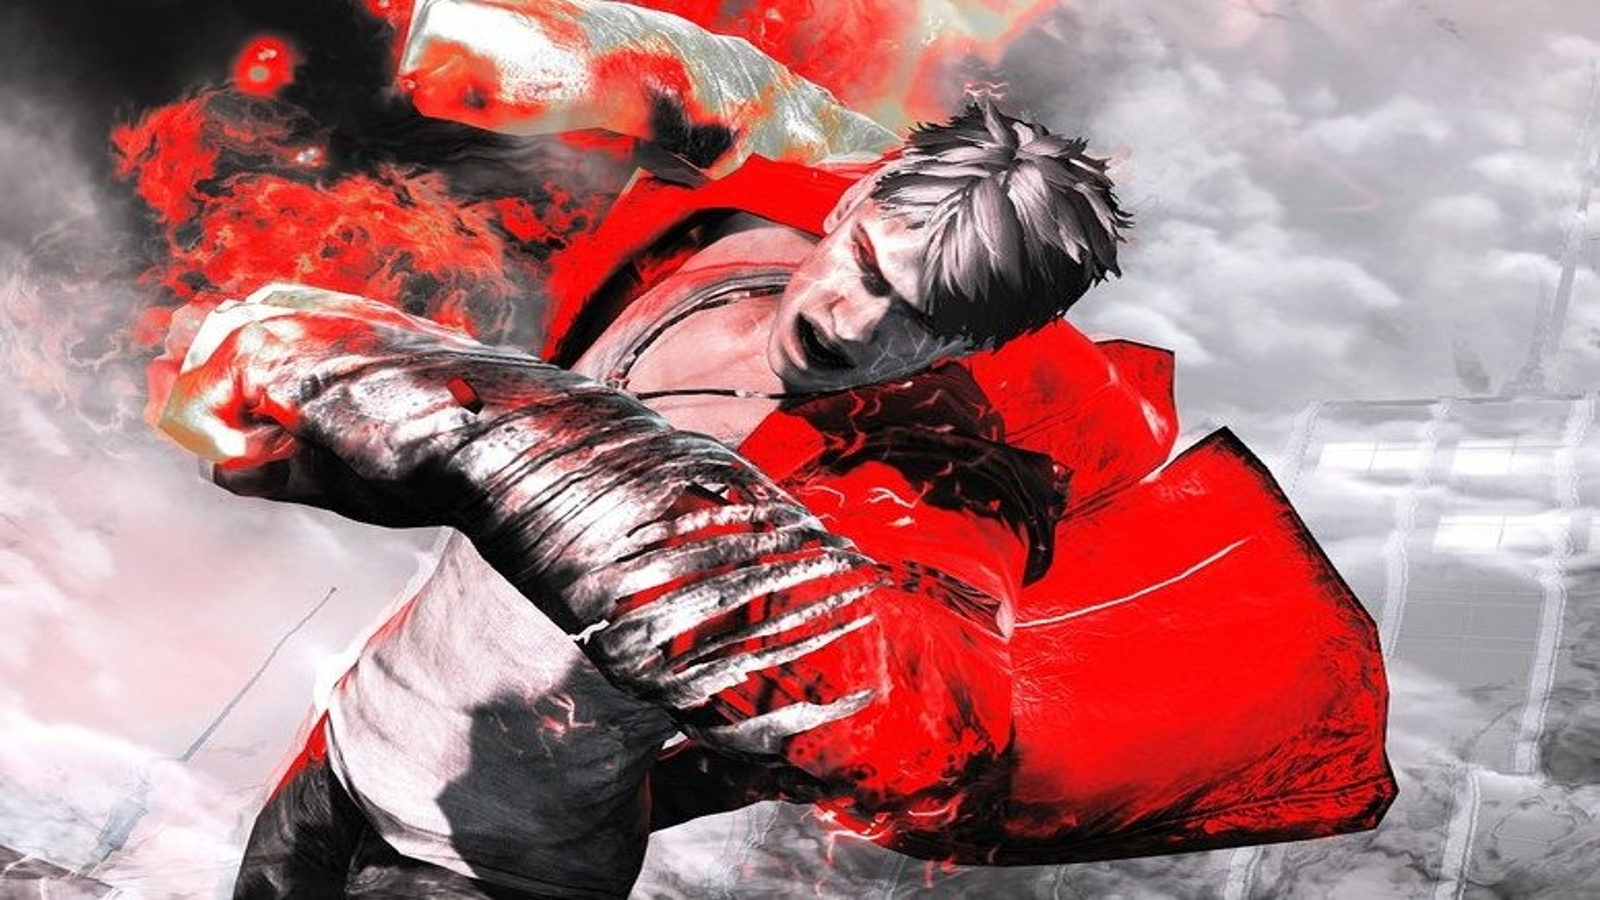 DmC Devil May Cry PS3 Launch Trailer 